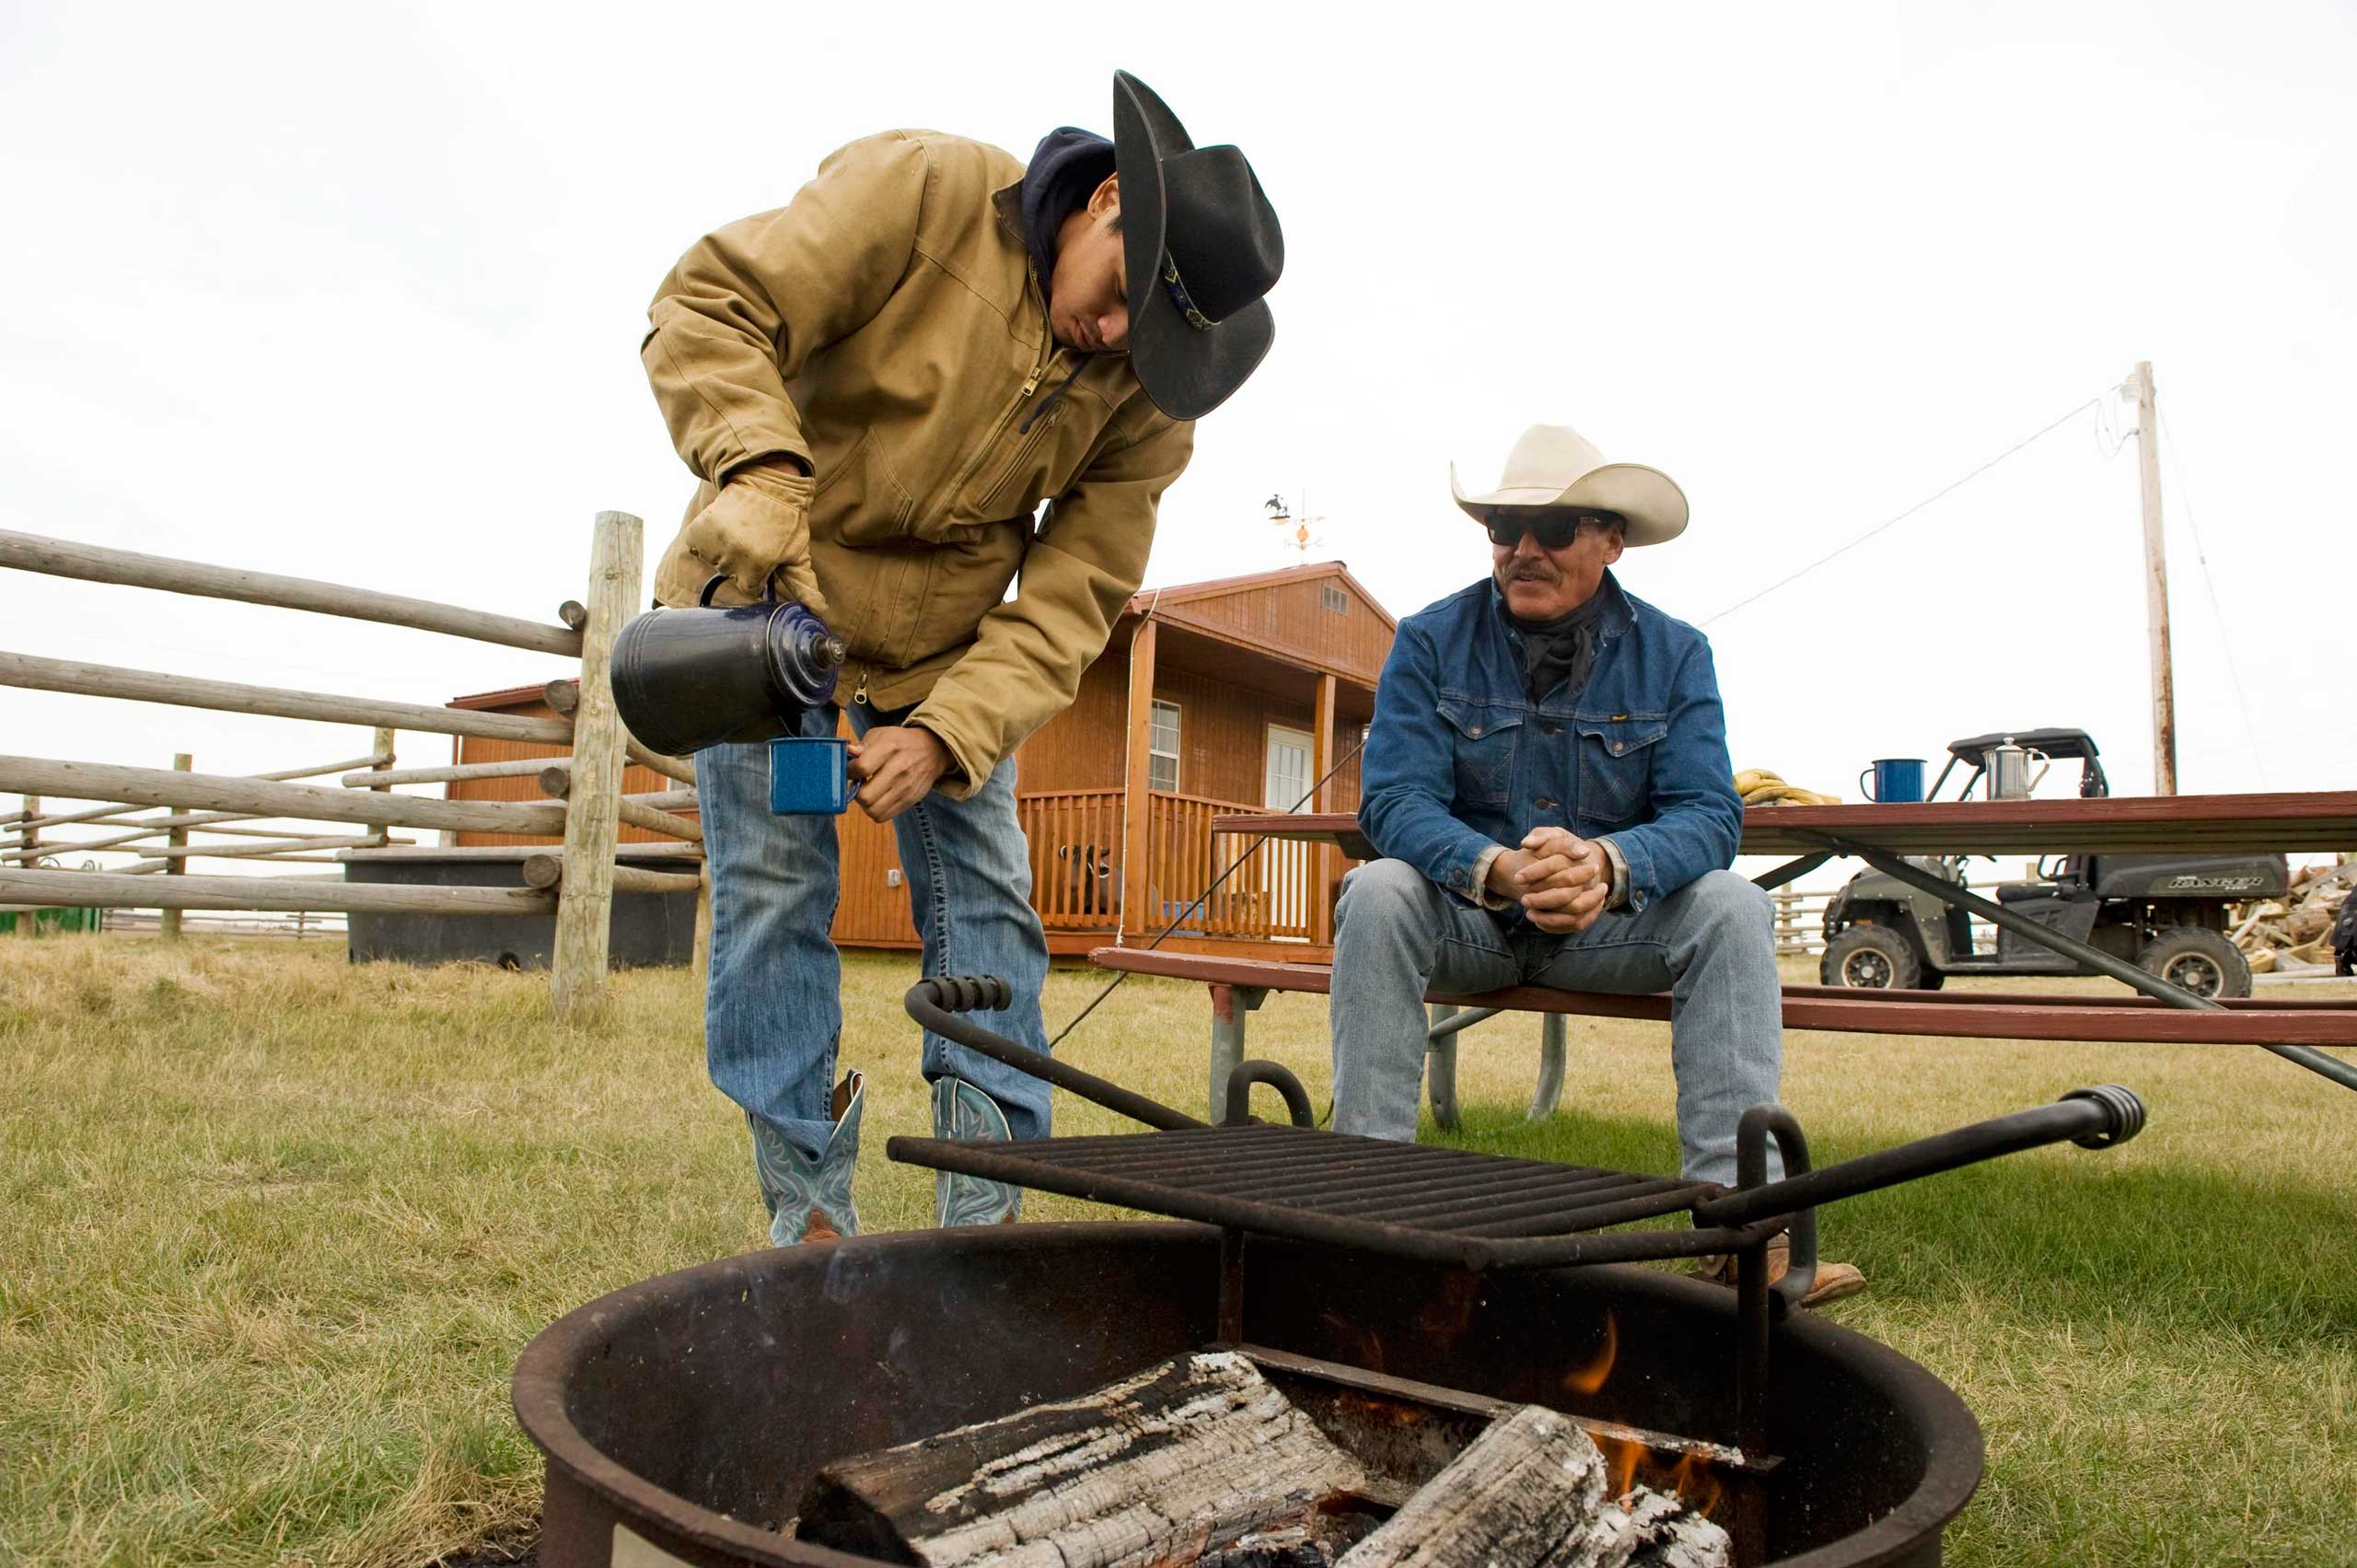 Jesse Bear (L) and his father, Sonny James Bear, Three Affiliated Tribes members, drink coffee over the campfire during a break from training horses on their ranch just off the Fort Berthold Reservation in N.D. on Nov. 1, 2014.